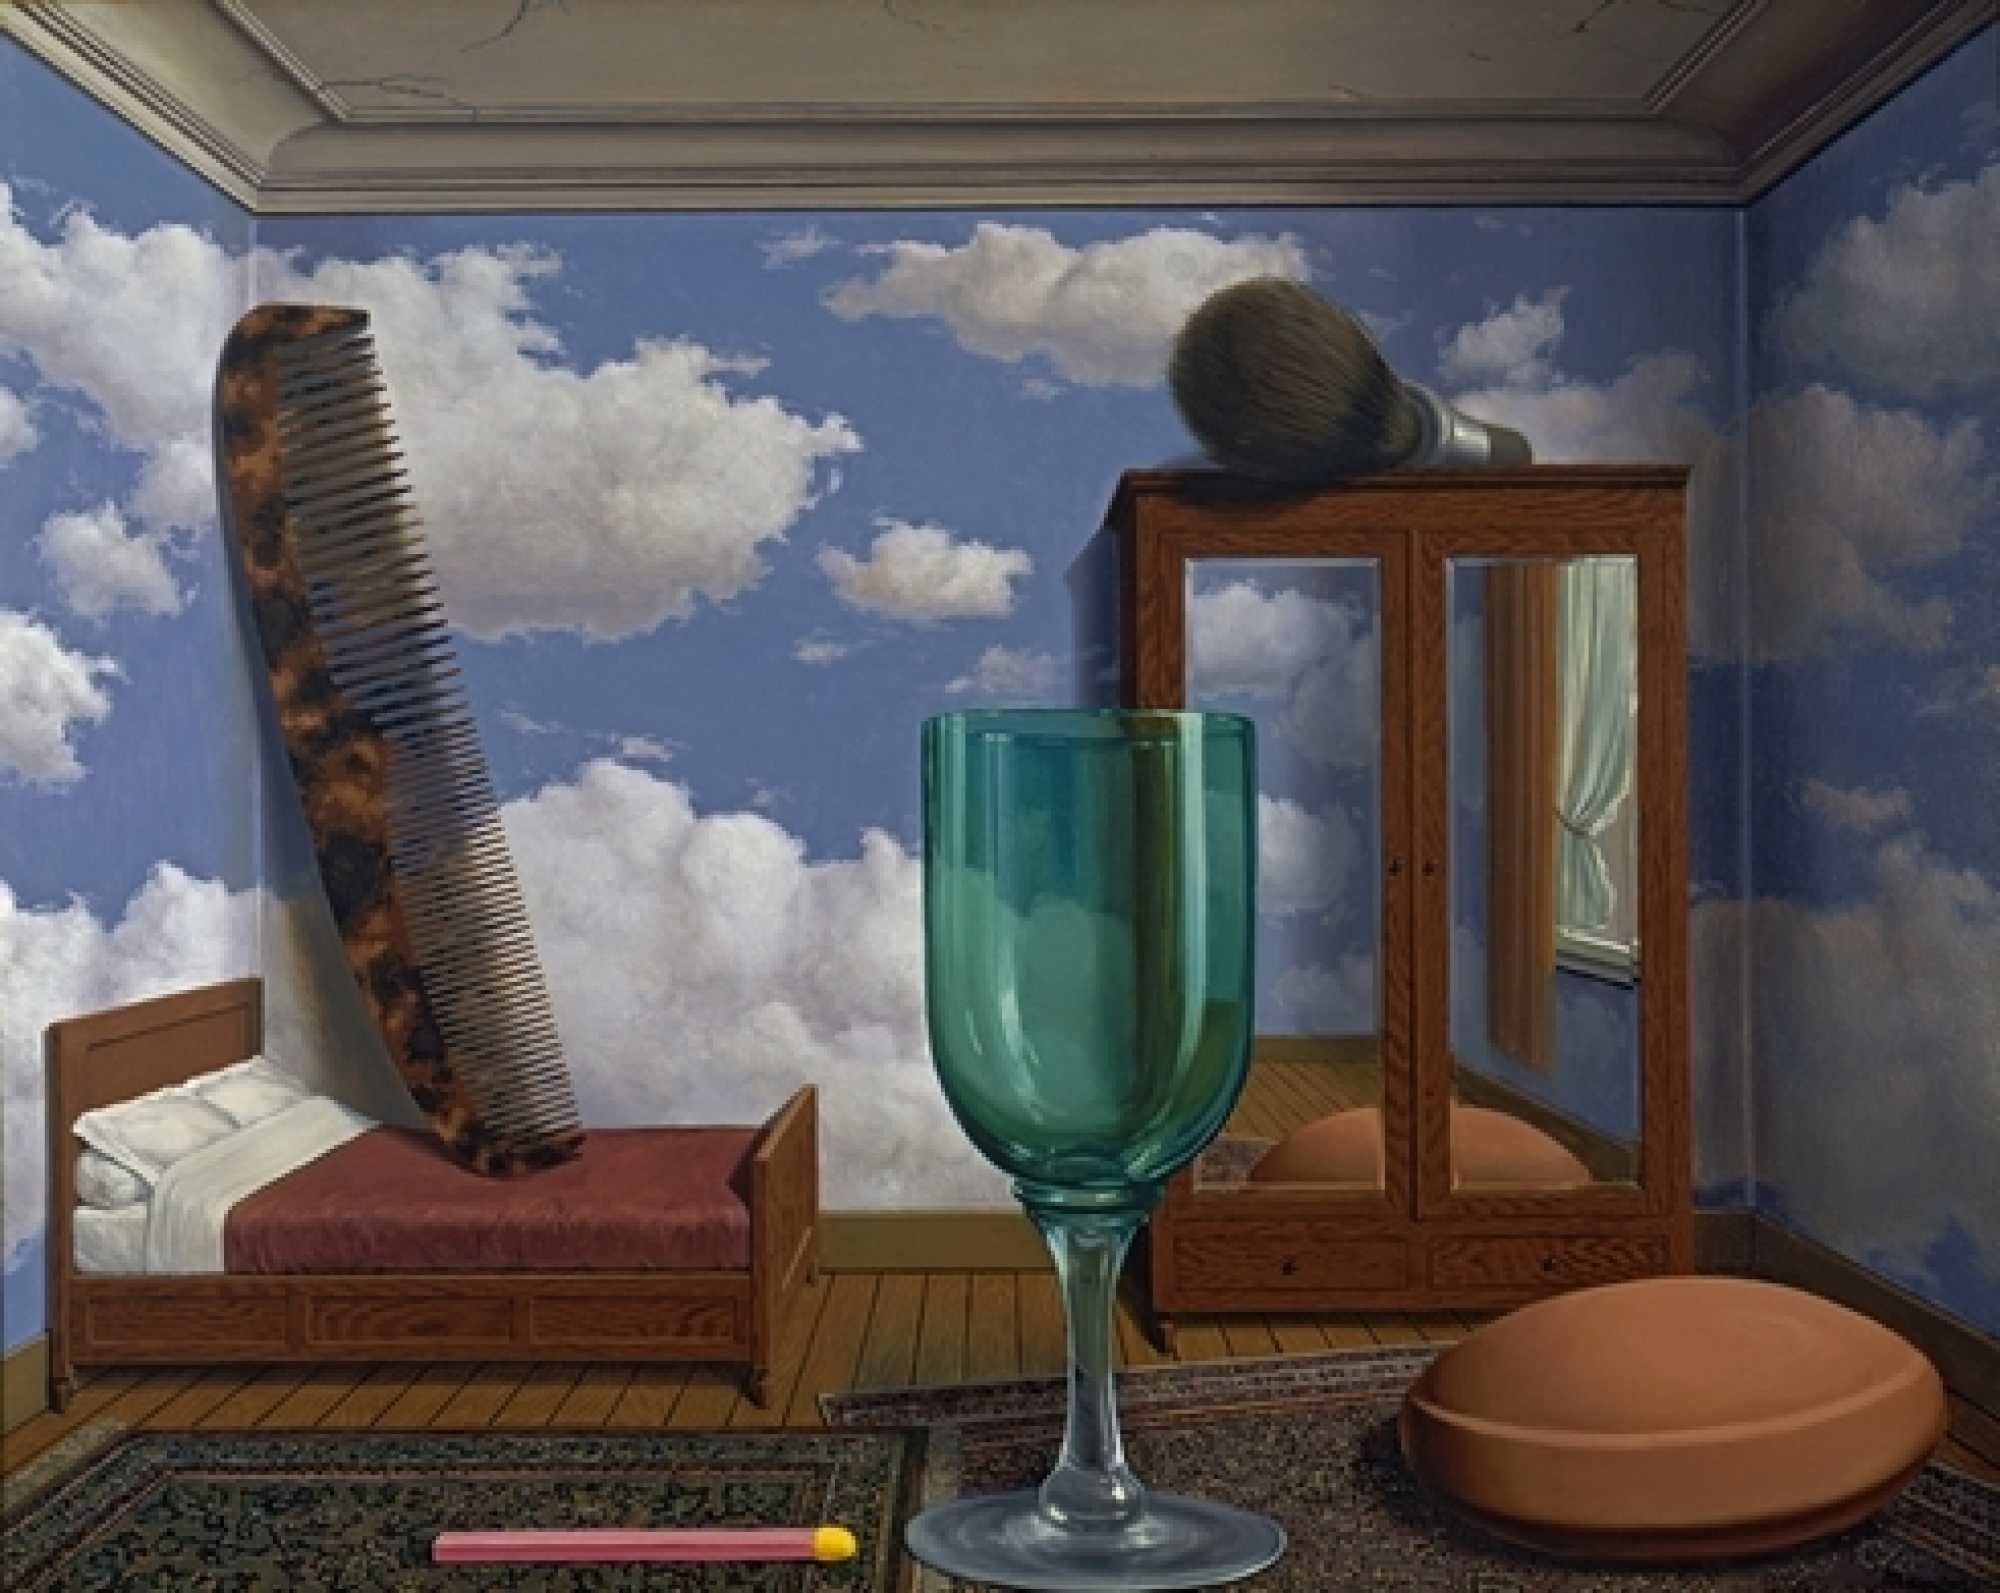 2000x1593 RenÃ© Magritte: "Personal values" (1952). Oil on canvas, 77